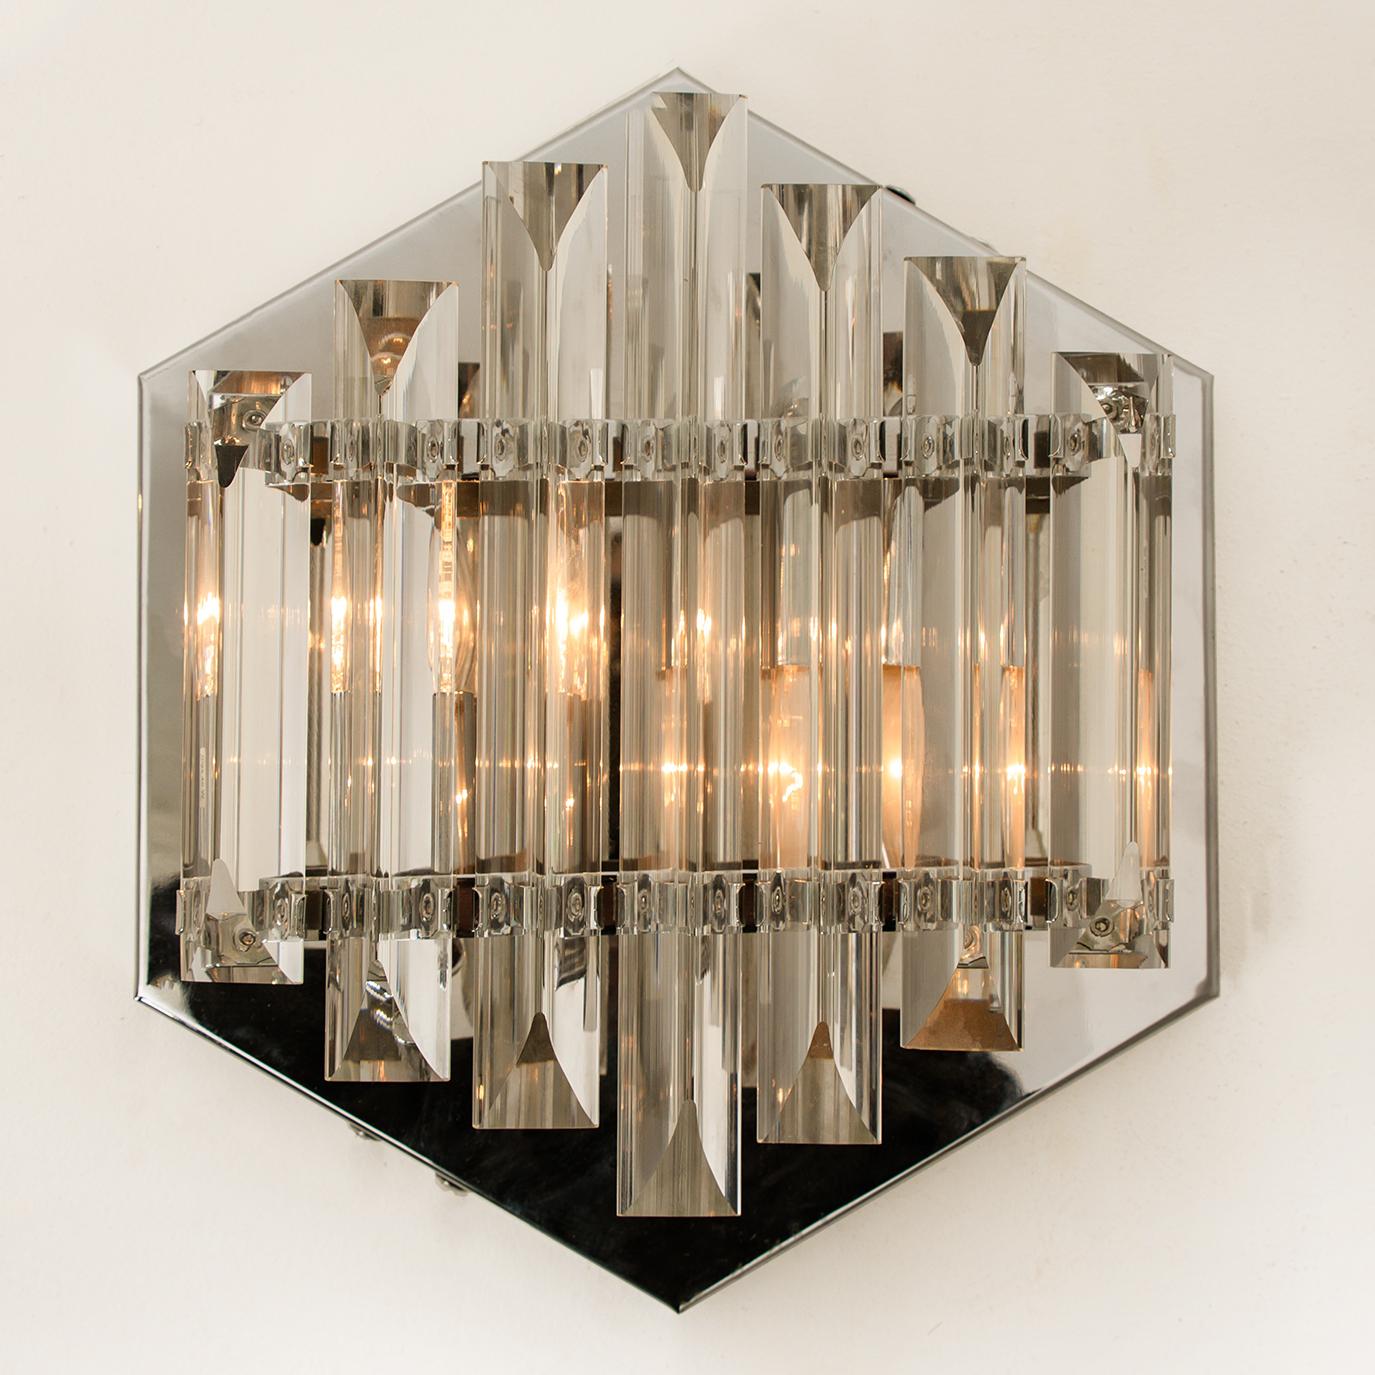 Pair of Venini style glass sconces with triedi crystals, manufactured in circa 1970 (late 1960s and early 1970s) featuring seven crystals clear glass 